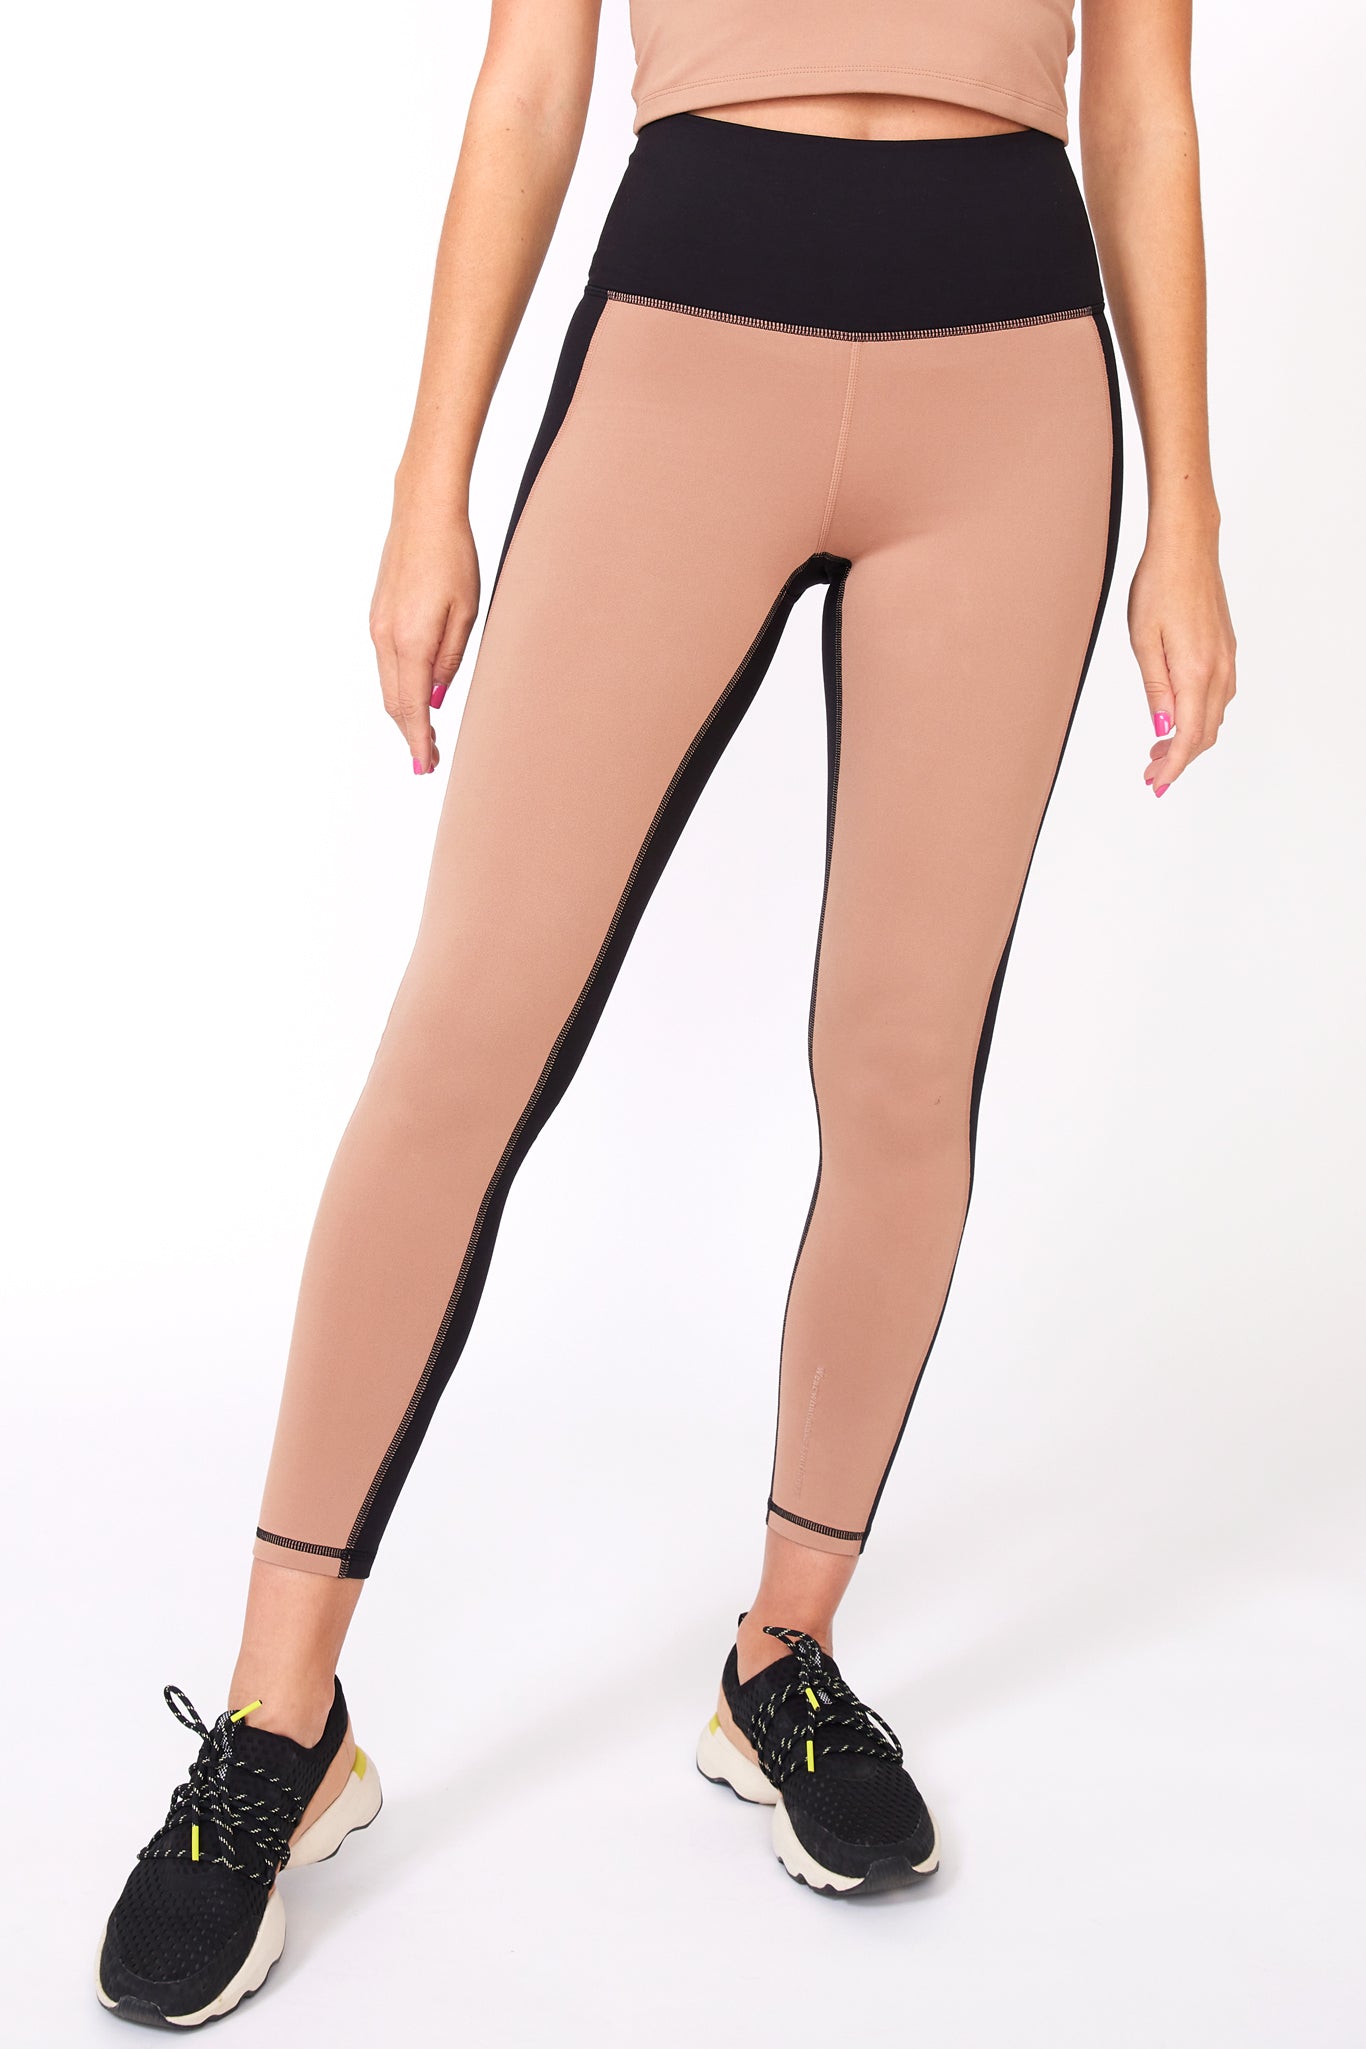 Leggings Lose 10 Lbs (Solid Colors) – Jacqueline B Clothing